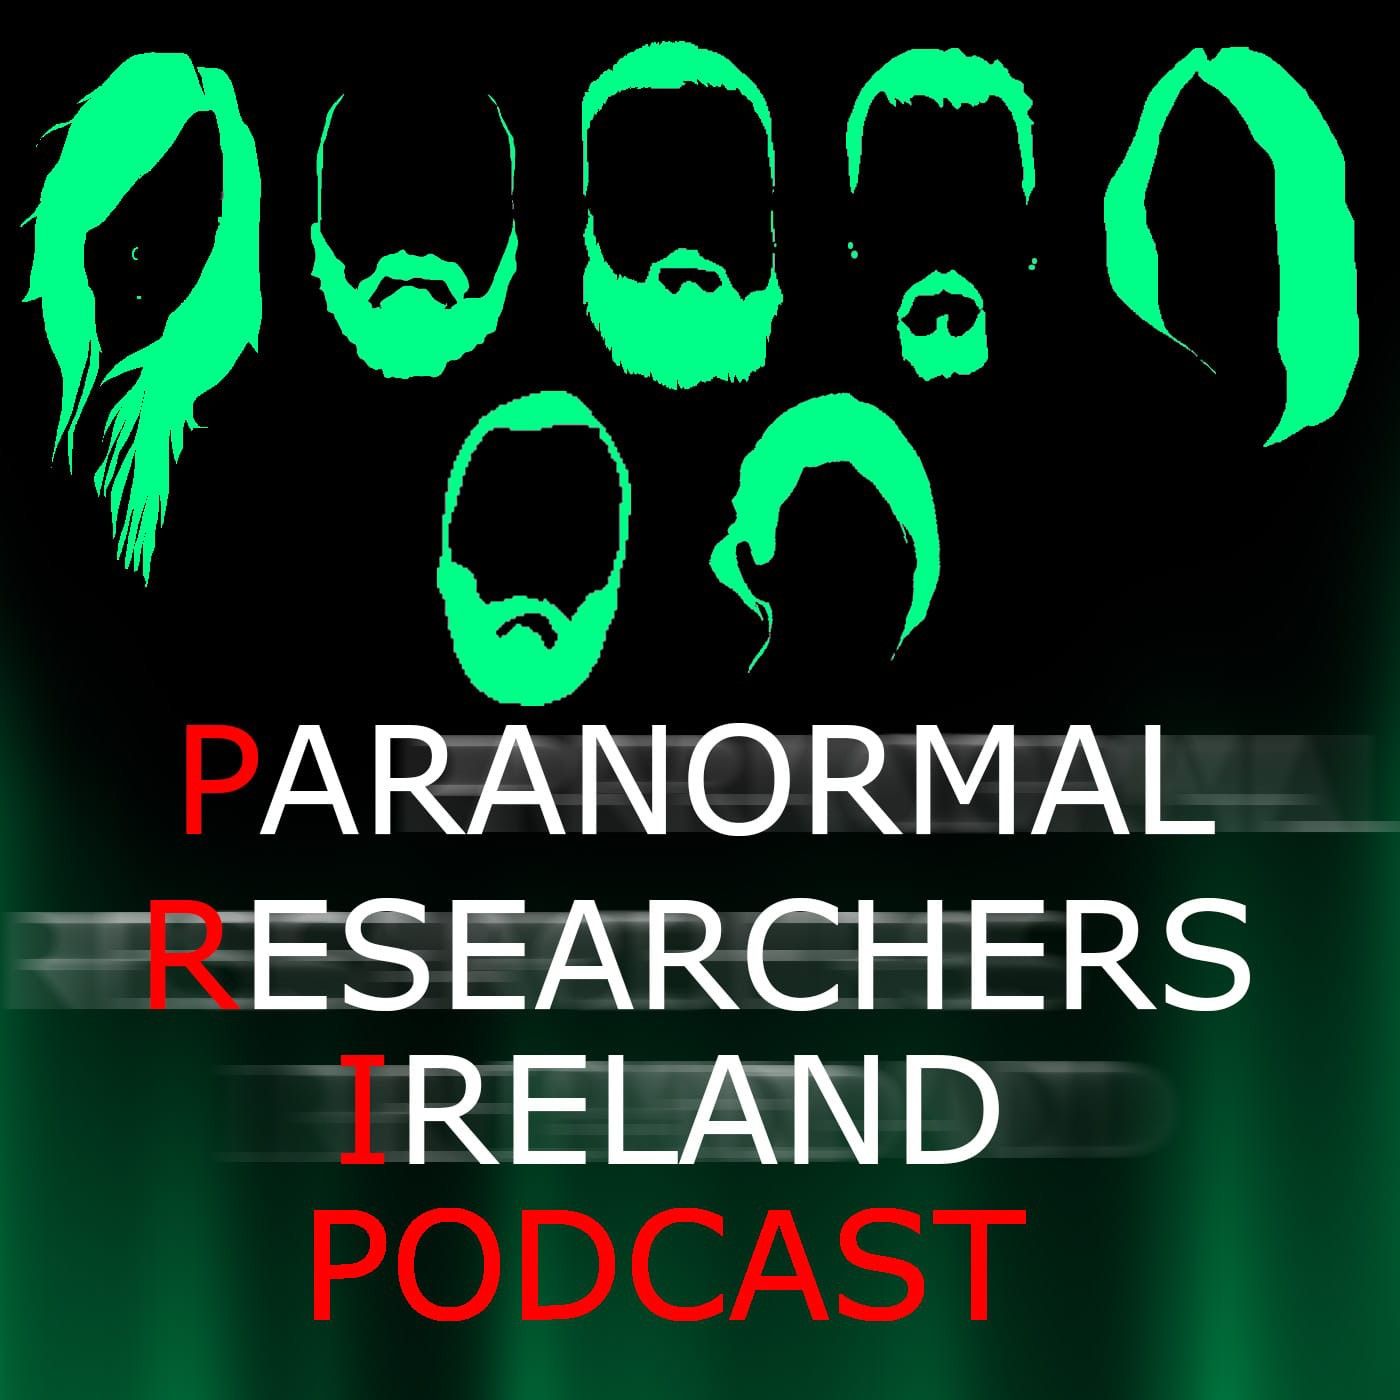 Ep 3: Castletown House, The Devil and the hunt